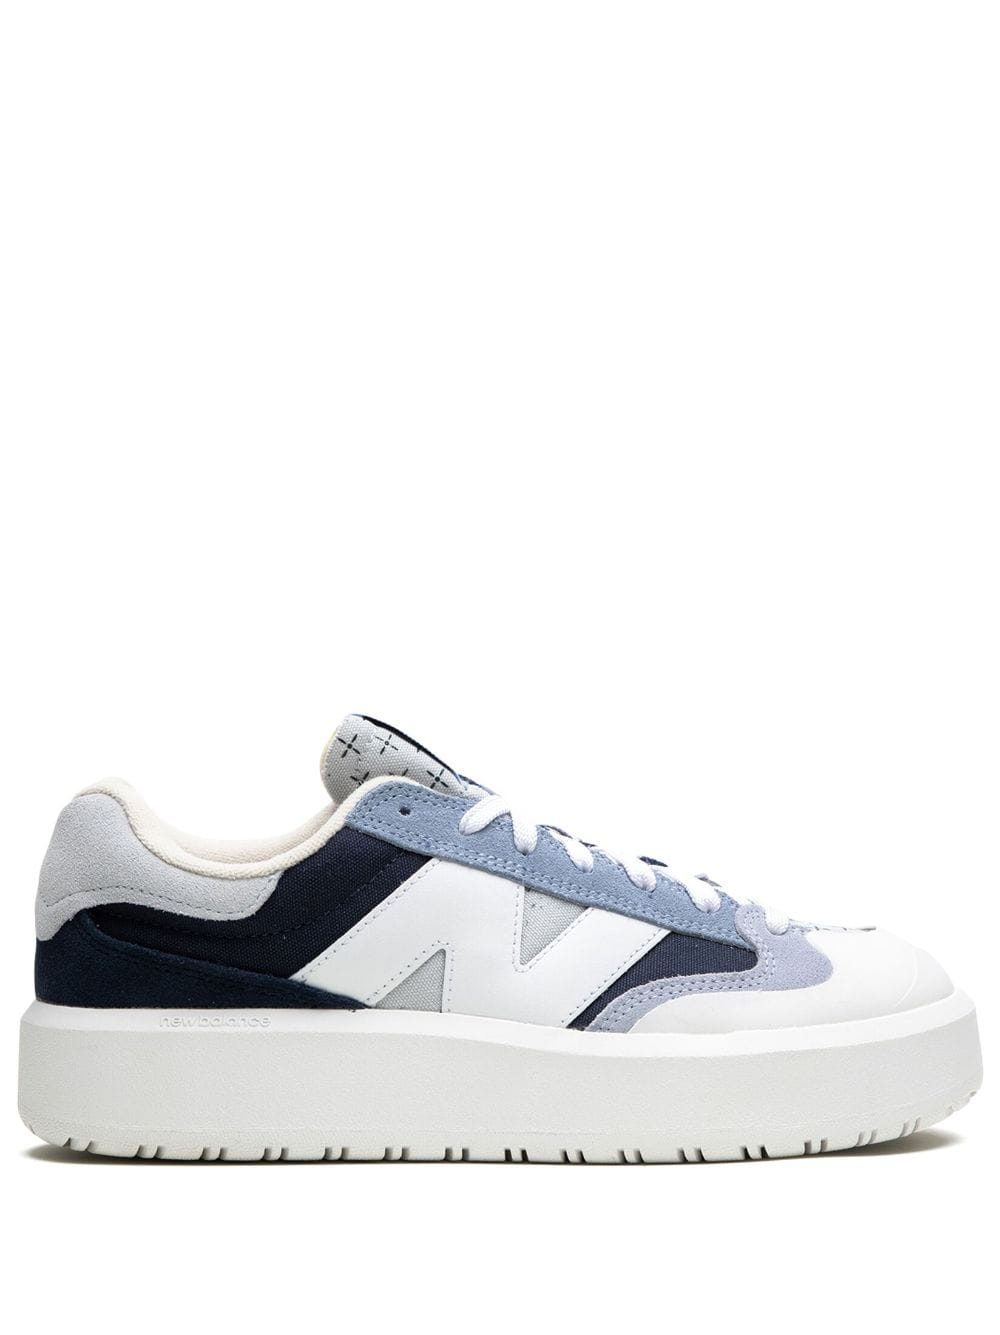 New Balance CT302 suede sneakers - Blue